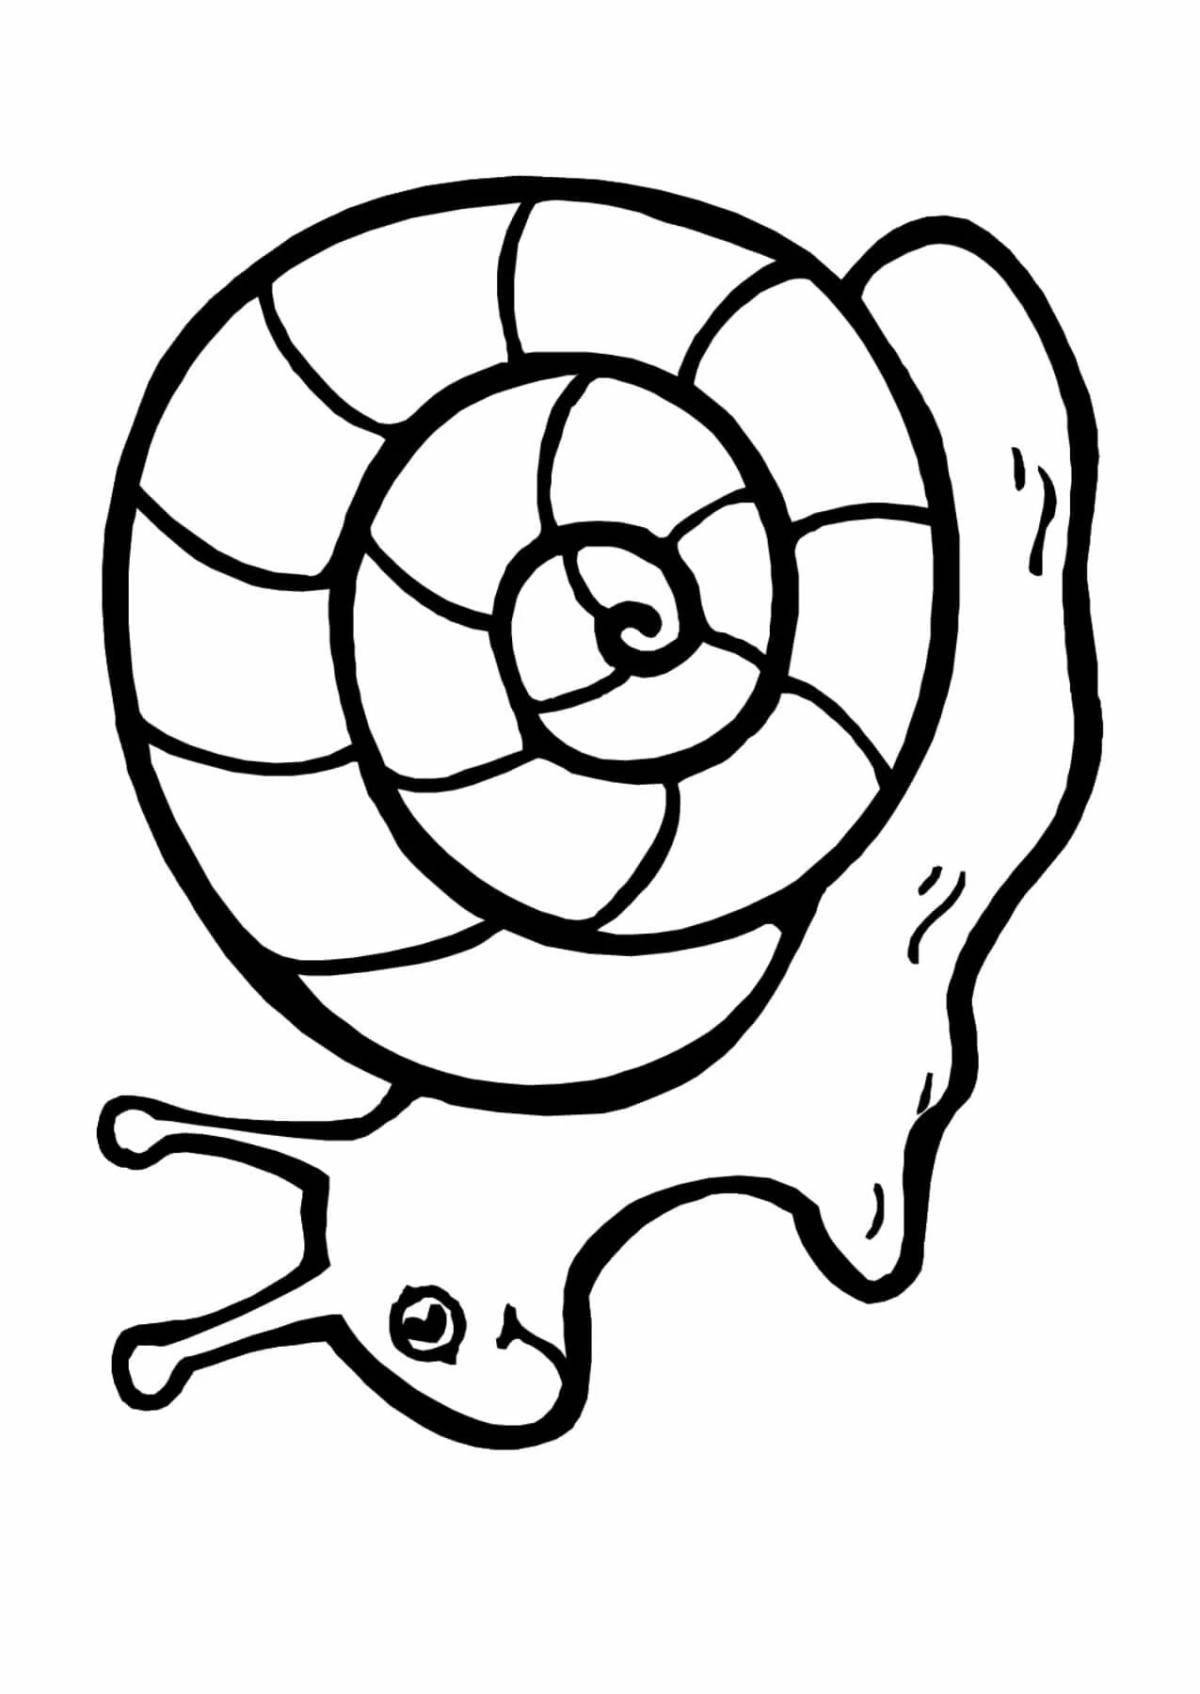 Fancy snail coloring book for 4-5 year olds